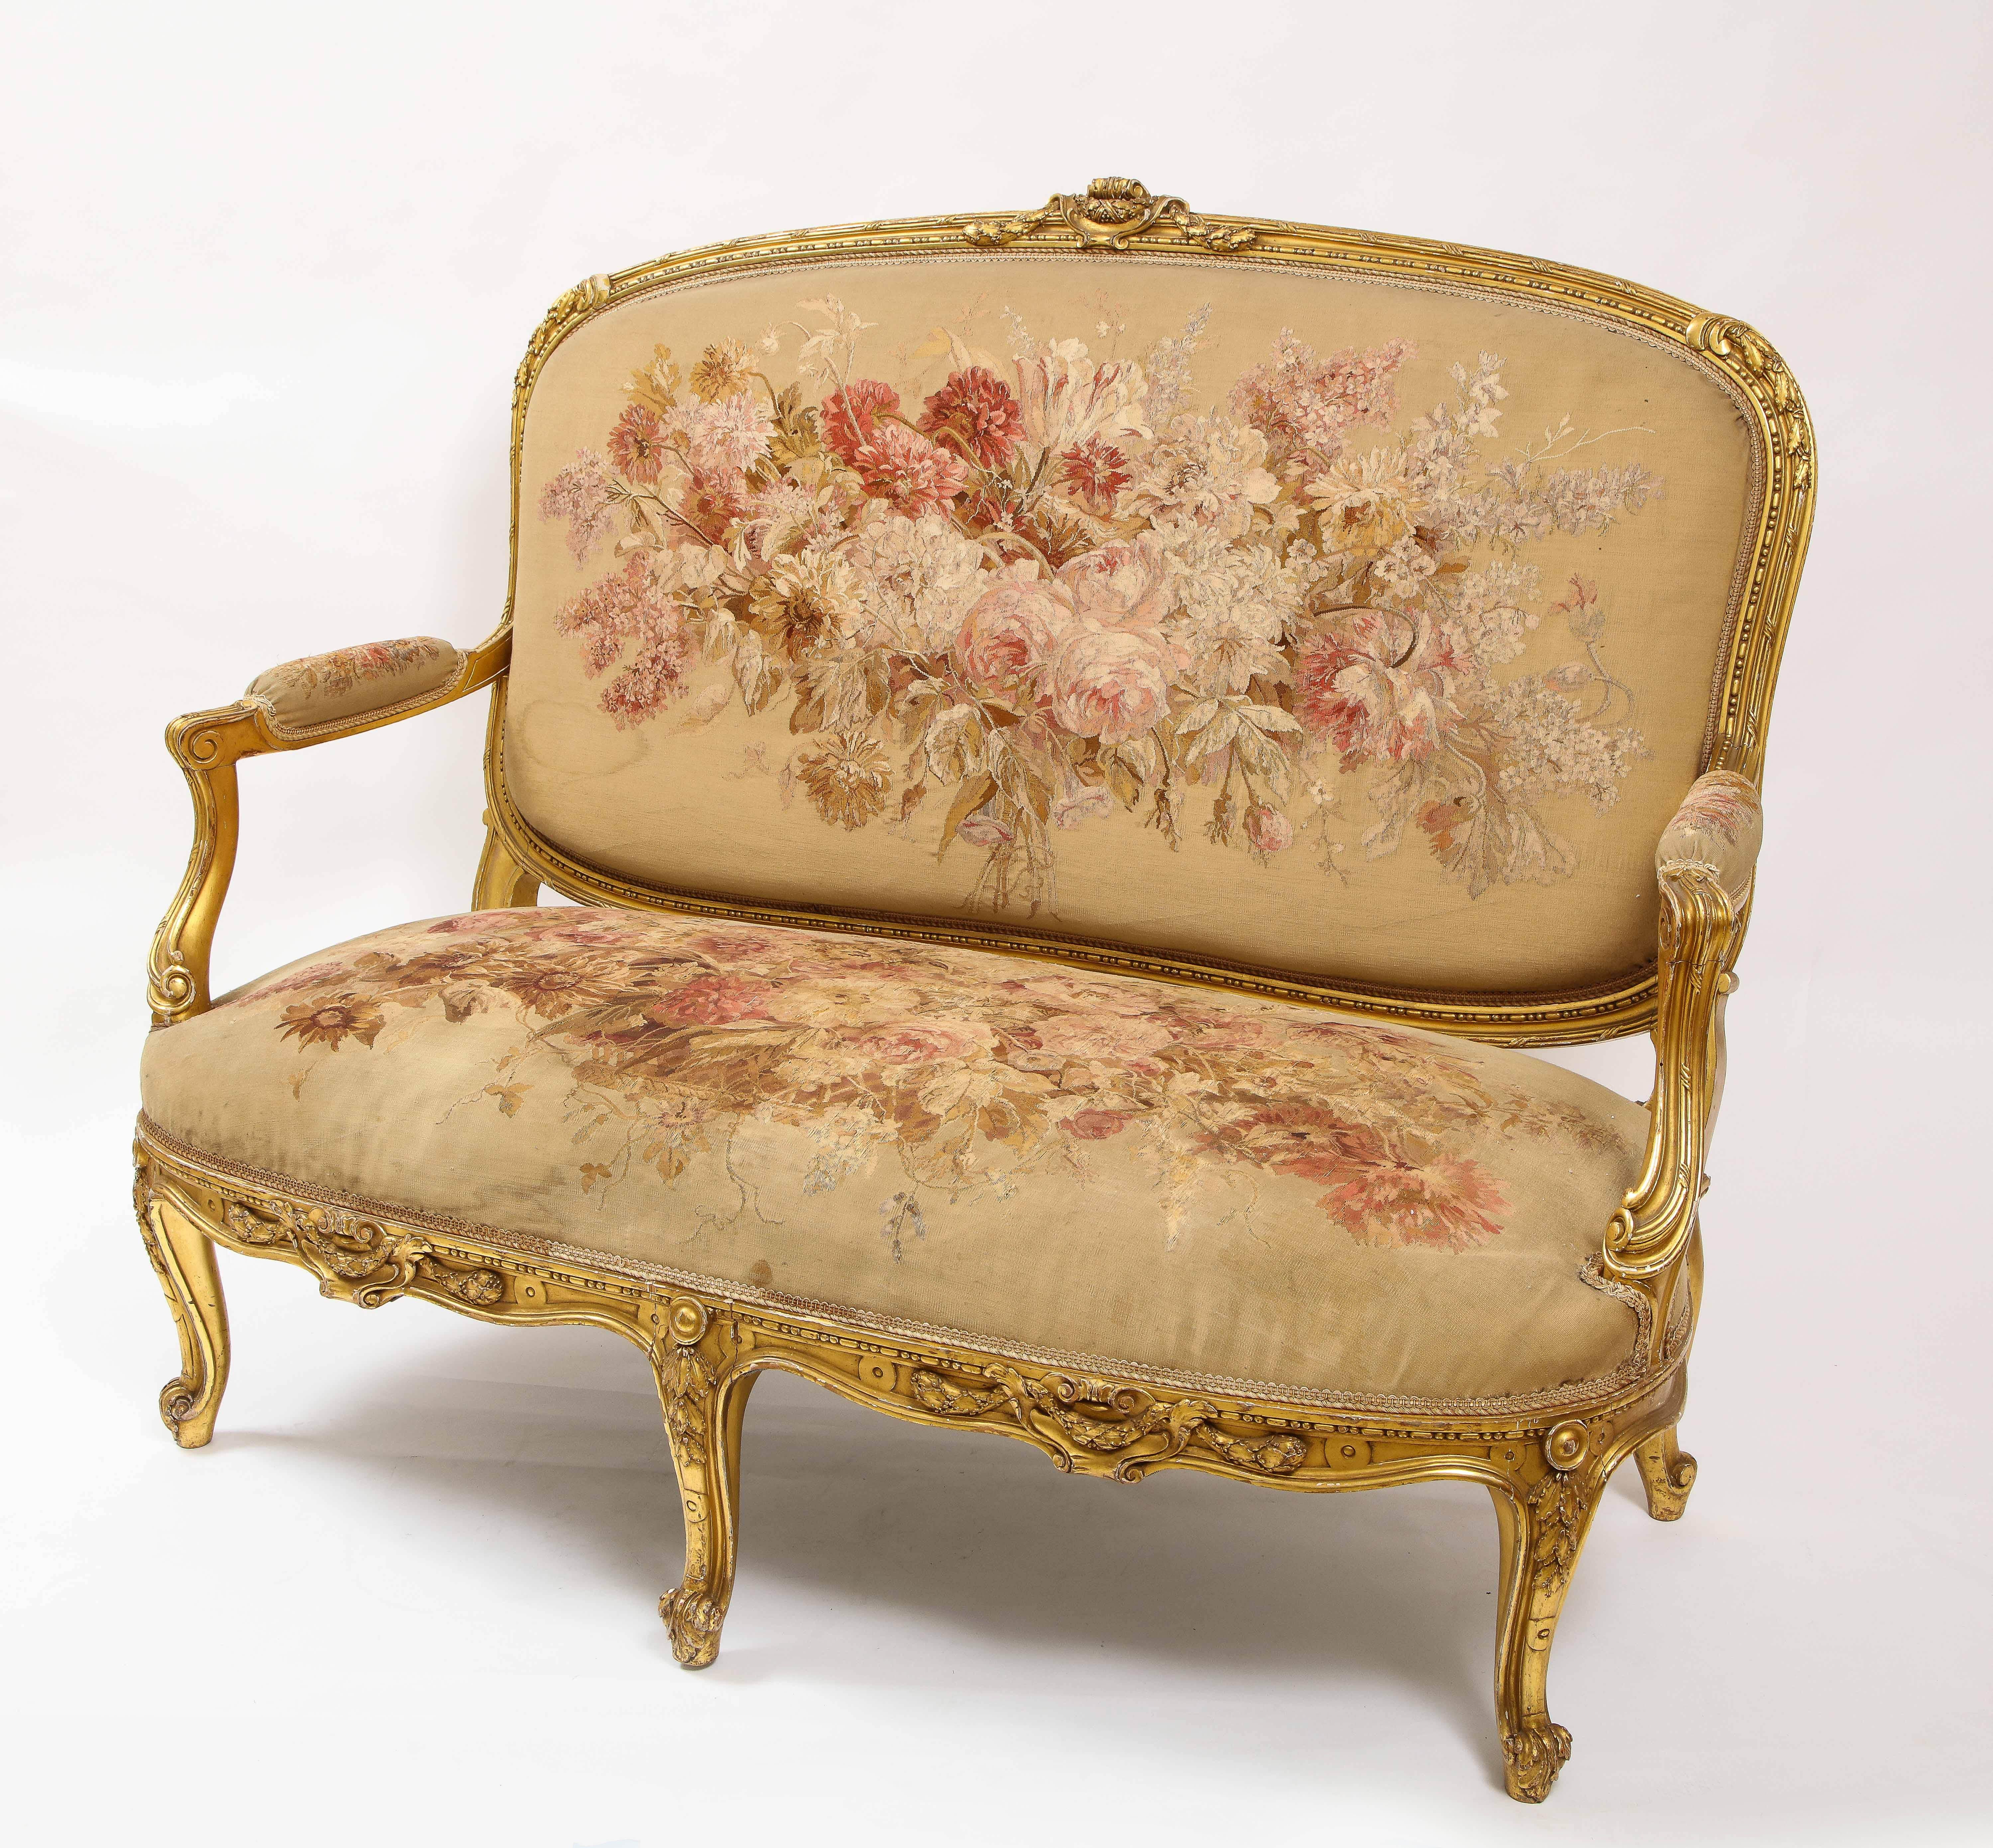 An Antique French 19th C. 5 Piece Royal Giltwood & Aubusson Suite, Att. Linke 1